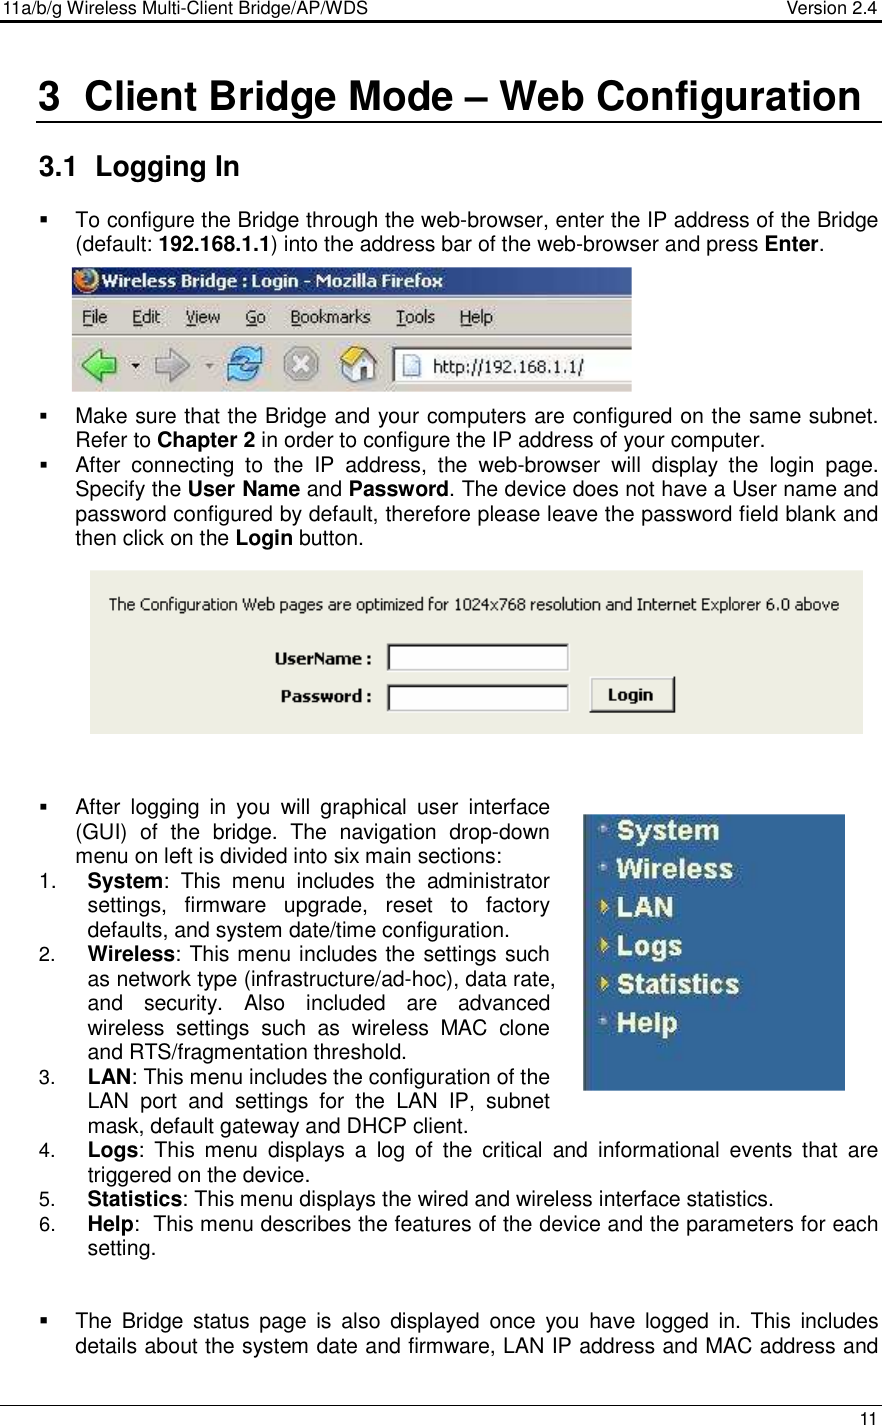 11a/b/g Wireless Multi-Client Bridge/AP/WDS                                  Version 2.4    11   3  Client Bridge Mode – Web Configuration  3.1  Logging In    To configure the Bridge through the web-browser, enter the IP address of the Bridge (default: 192.168.1.1) into the address bar of the web-browser and press Enter.         Make sure that the Bridge and your computers are configured on the same subnet. Refer to Chapter 2 in order to configure the IP address of your computer.  After  connecting  to  the  IP  address,  the  web-browser  will  display  the  login  page. Specify the User Name and Password. The device does not have a User name and password configured by default, therefore please leave the password field blank and then click on the Login button.              After  logging  in  you  will  graphical  user  interface (GUI)  of  the  bridge.  The  navigation  drop-down menu on left is divided into six main sections: 1.  System:  This  menu  includes  the  administrator settings,  firmware  upgrade,  reset  to  factory defaults, and system date/time configuration.  2.  Wireless: This menu includes the settings such as network type (infrastructure/ad-hoc), data rate, and  security.  Also  included  are  advanced wireless  settings  such  as  wireless  MAC  clone and RTS/fragmentation threshold.  3.  LAN: This menu includes the configuration of the LAN  port  and  settings  for  the  LAN  IP,  subnet mask, default gateway and DHCP client.  4.  Logs:  This  menu  displays  a  log  of  the  critical  and  informational  events  that  are triggered on the device.  5.  Statistics: This menu displays the wired and wireless interface statistics.  6.  Help:  This menu describes the features of the device and the parameters for each setting.      The  Bridge  status  page  is  also  displayed  once  you  have  logged  in.  This  includes details about the system date and firmware, LAN IP address and MAC address and   